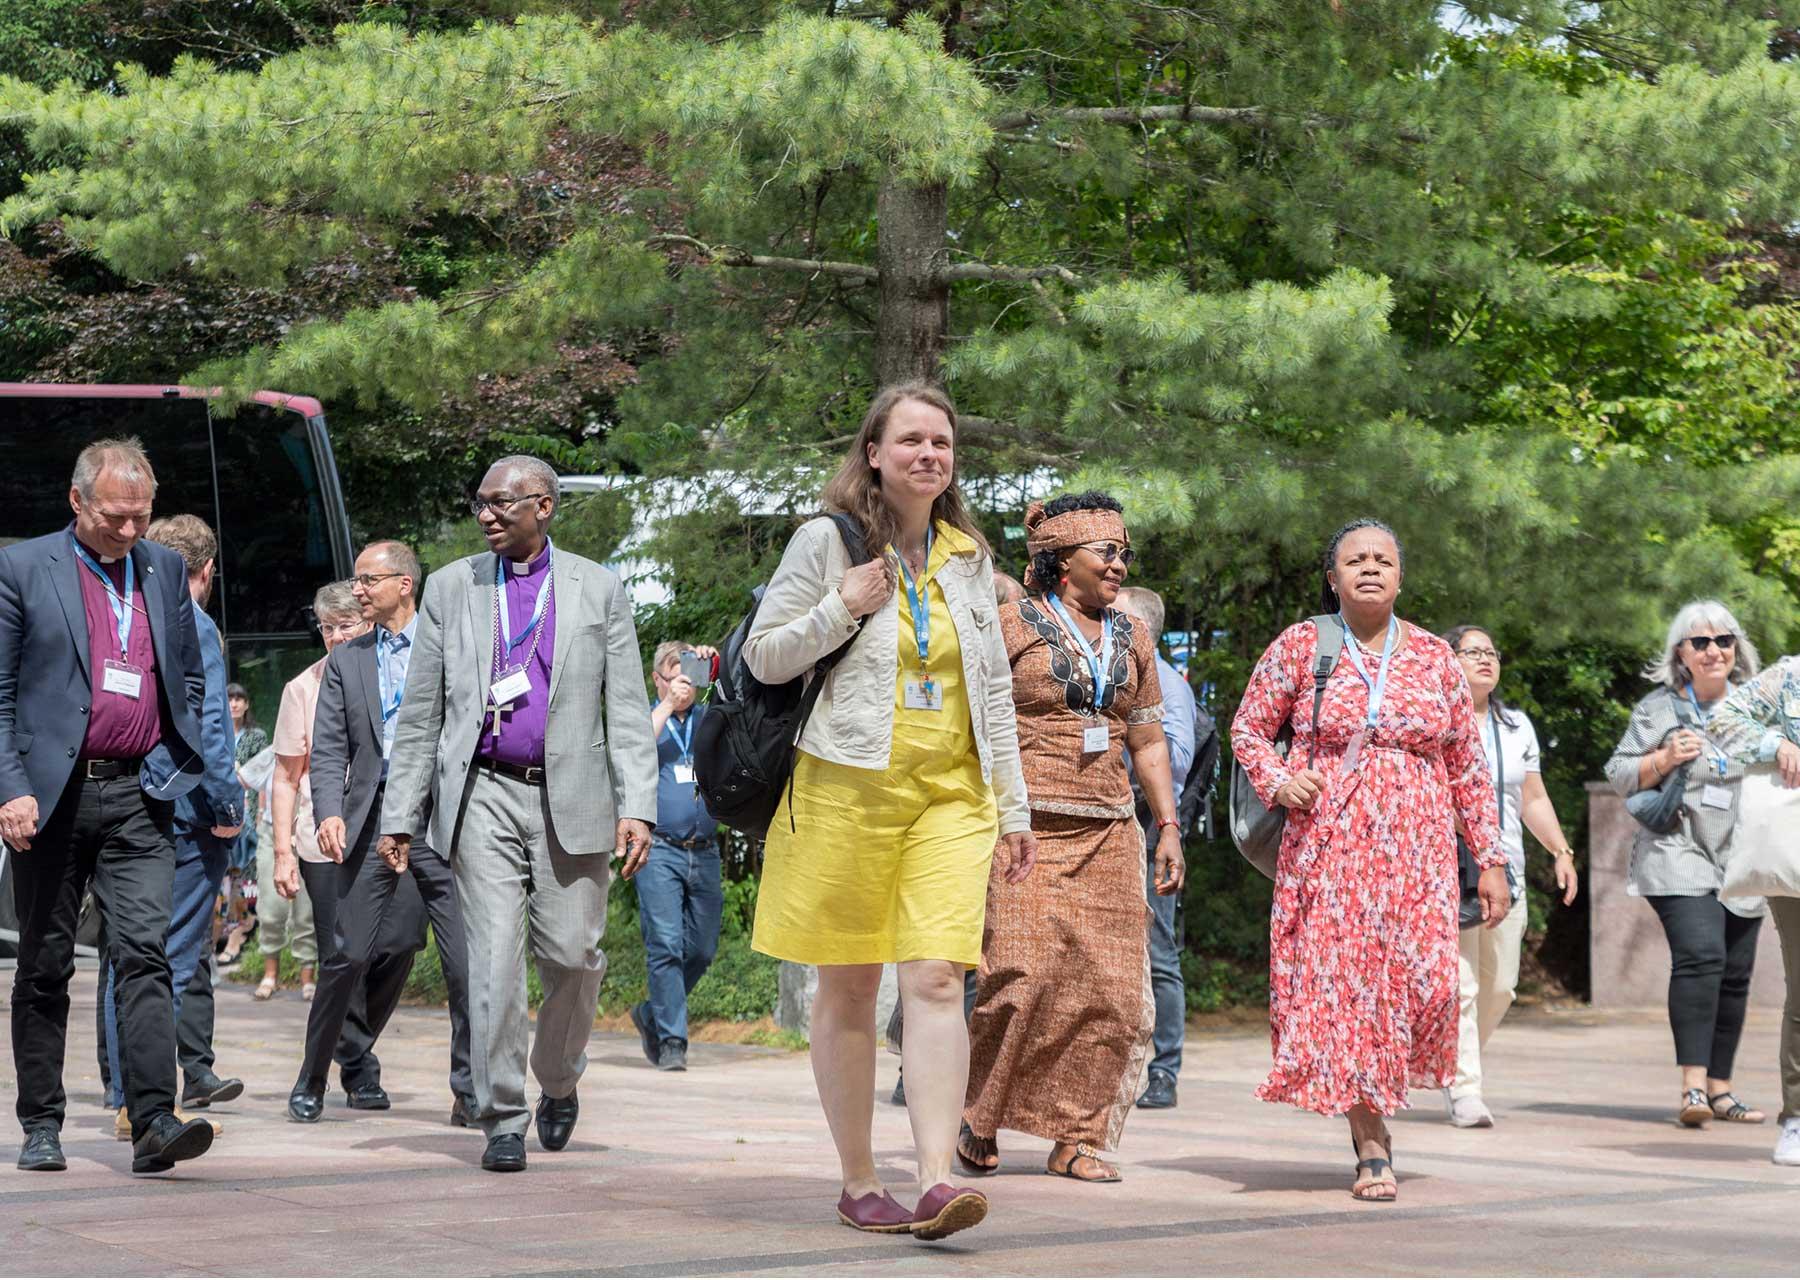 Council members make their way to the new LWF Communion Office in Geneva. Photo: LWF/A. Hillert